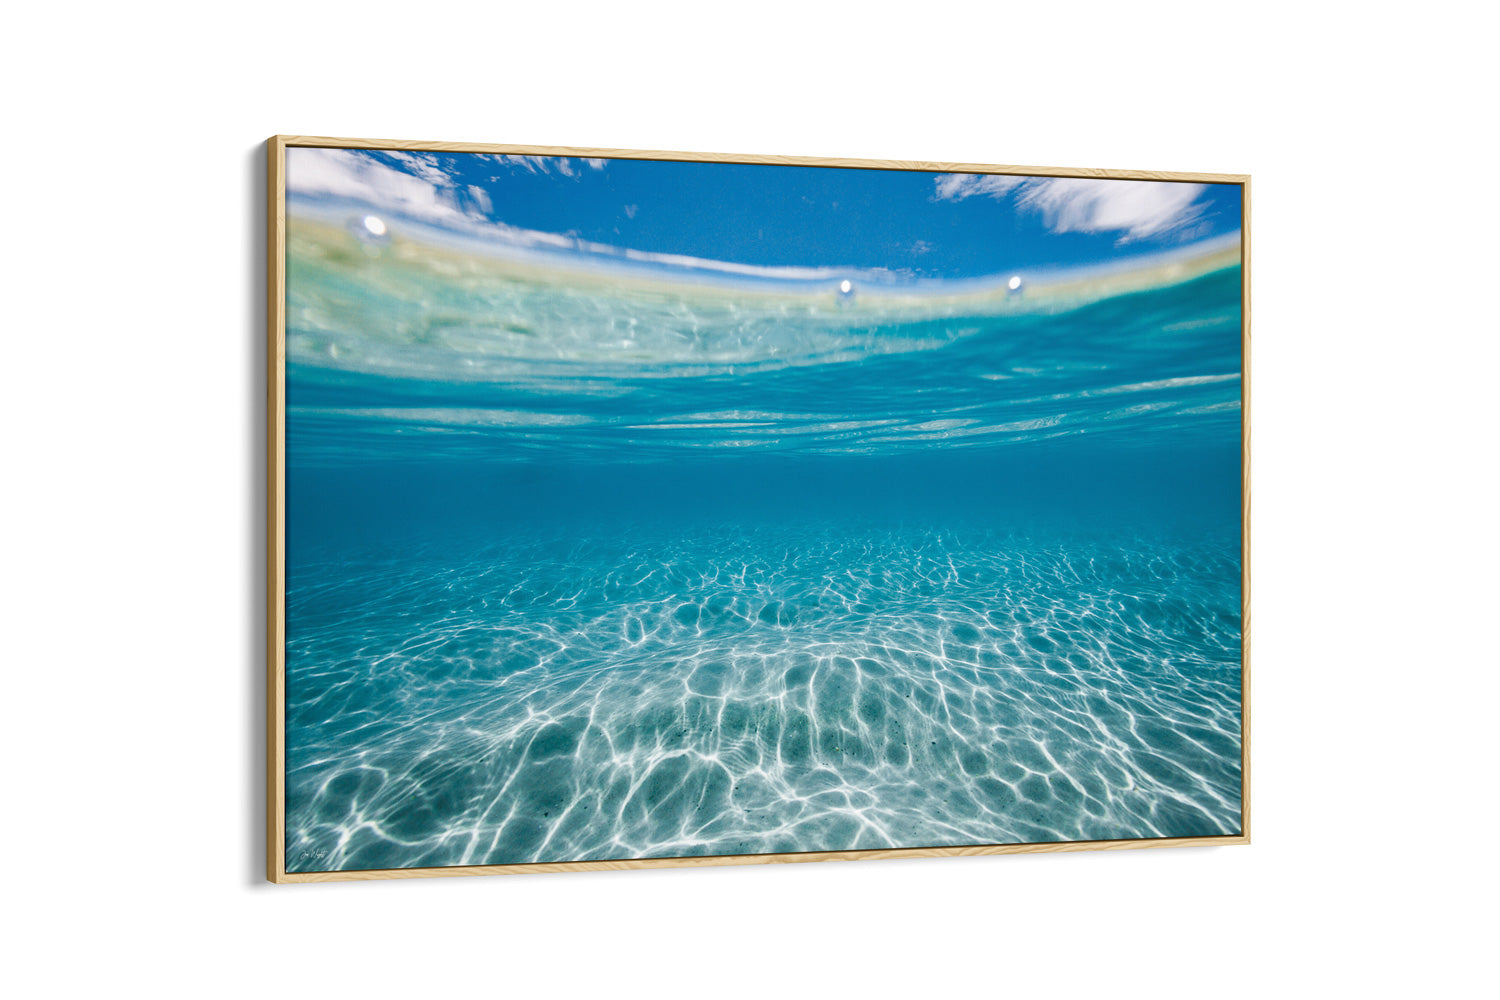 Framed canvas art on wall underwater photography